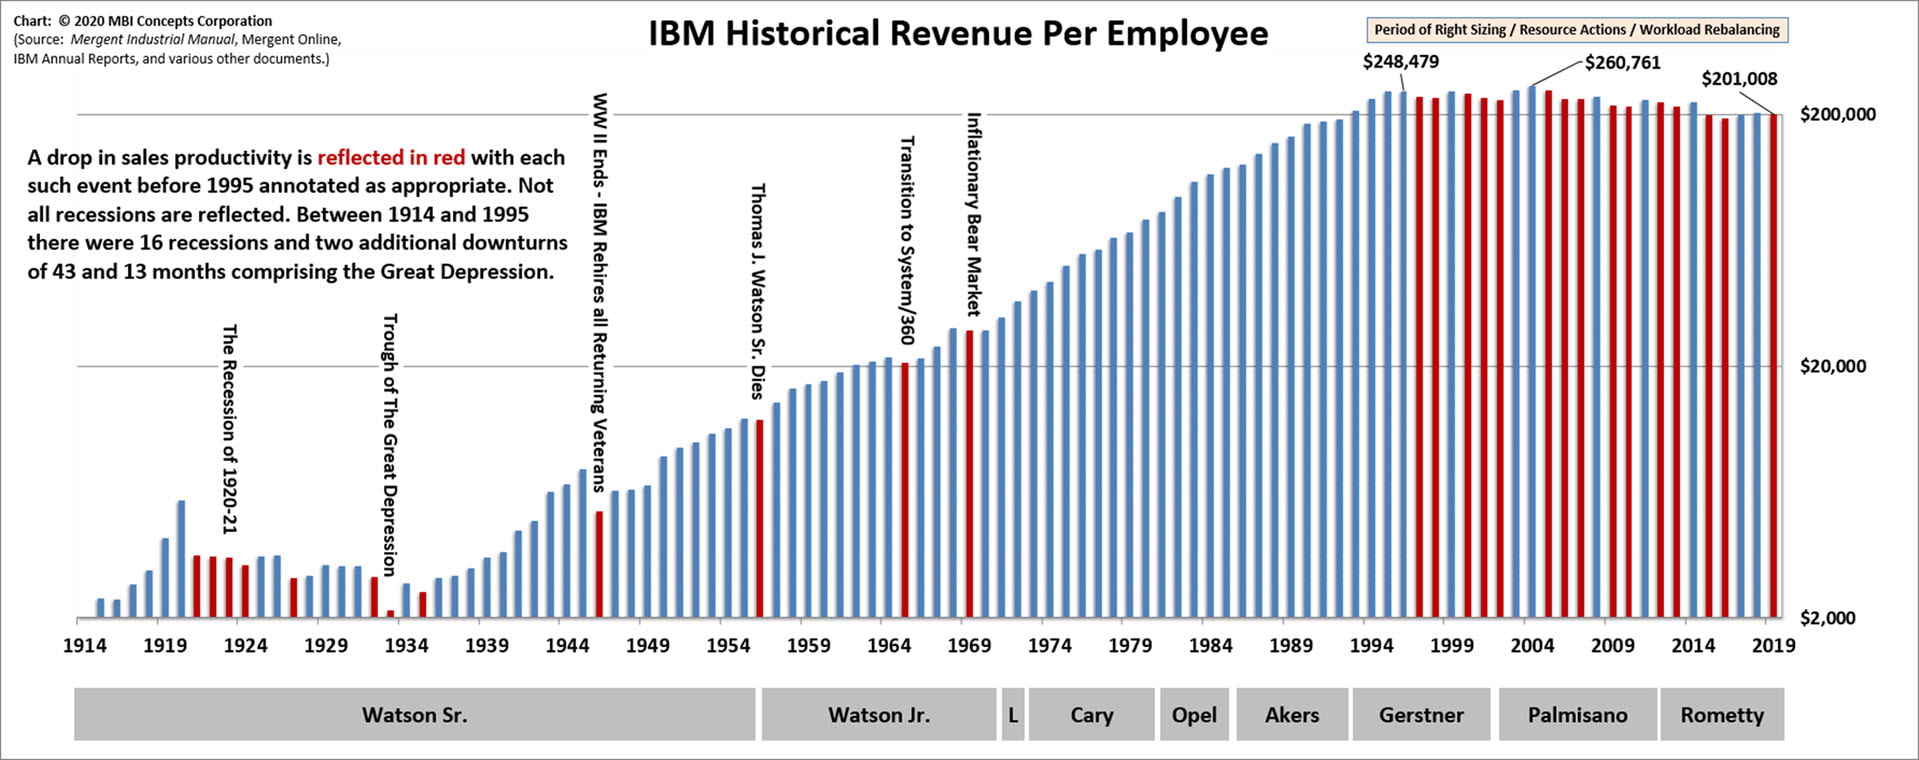 Image of chart showing IBM's revenue per employee from 1914 through 2019.